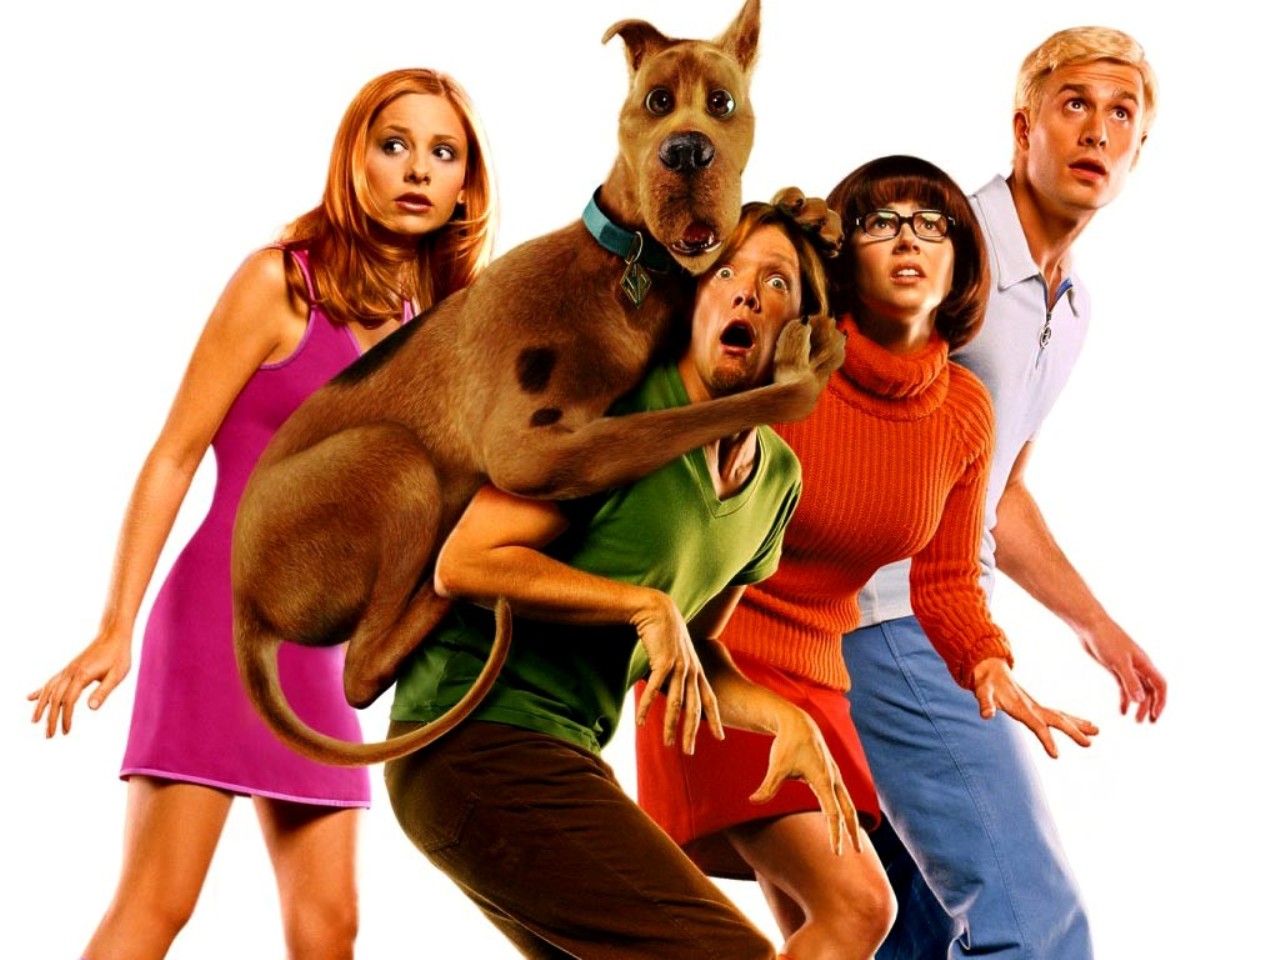 40 HQ Pictures All Scooby Doo Movies Animated : Expedition Of Scooby Doo From Cartoon To Animation Movies